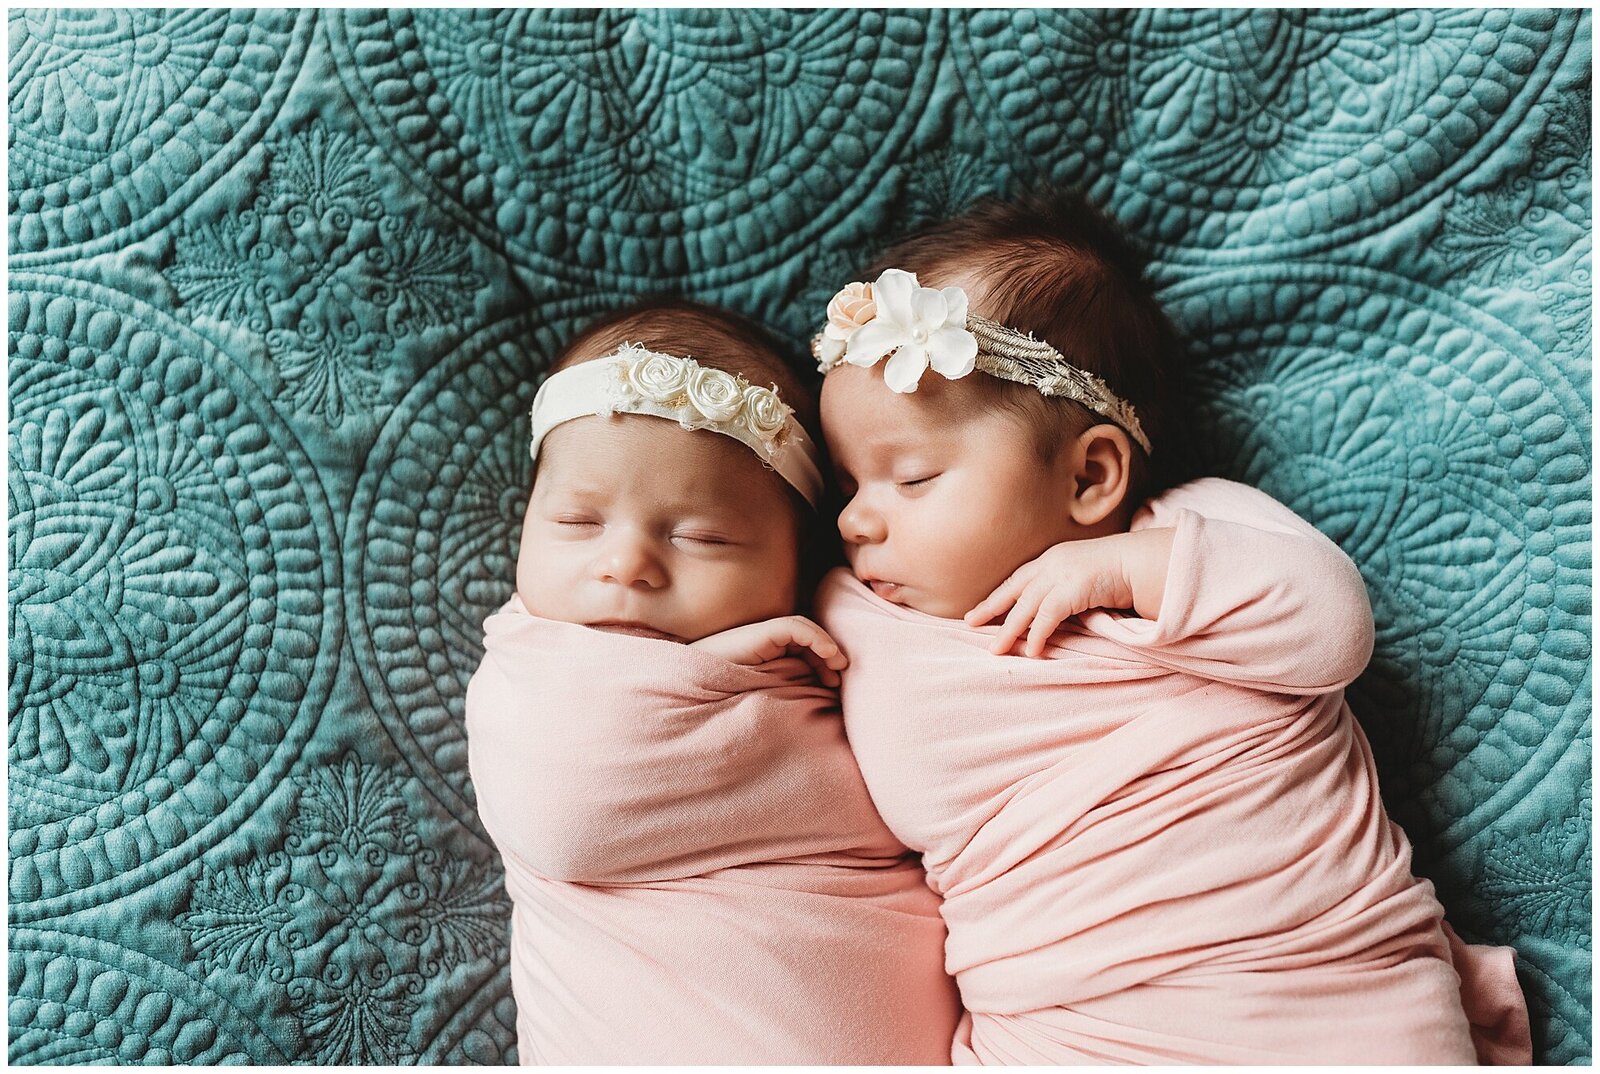 newborn twin girls in pink swaddles on turquoise velvet seattle photographer Emily Ann Photography